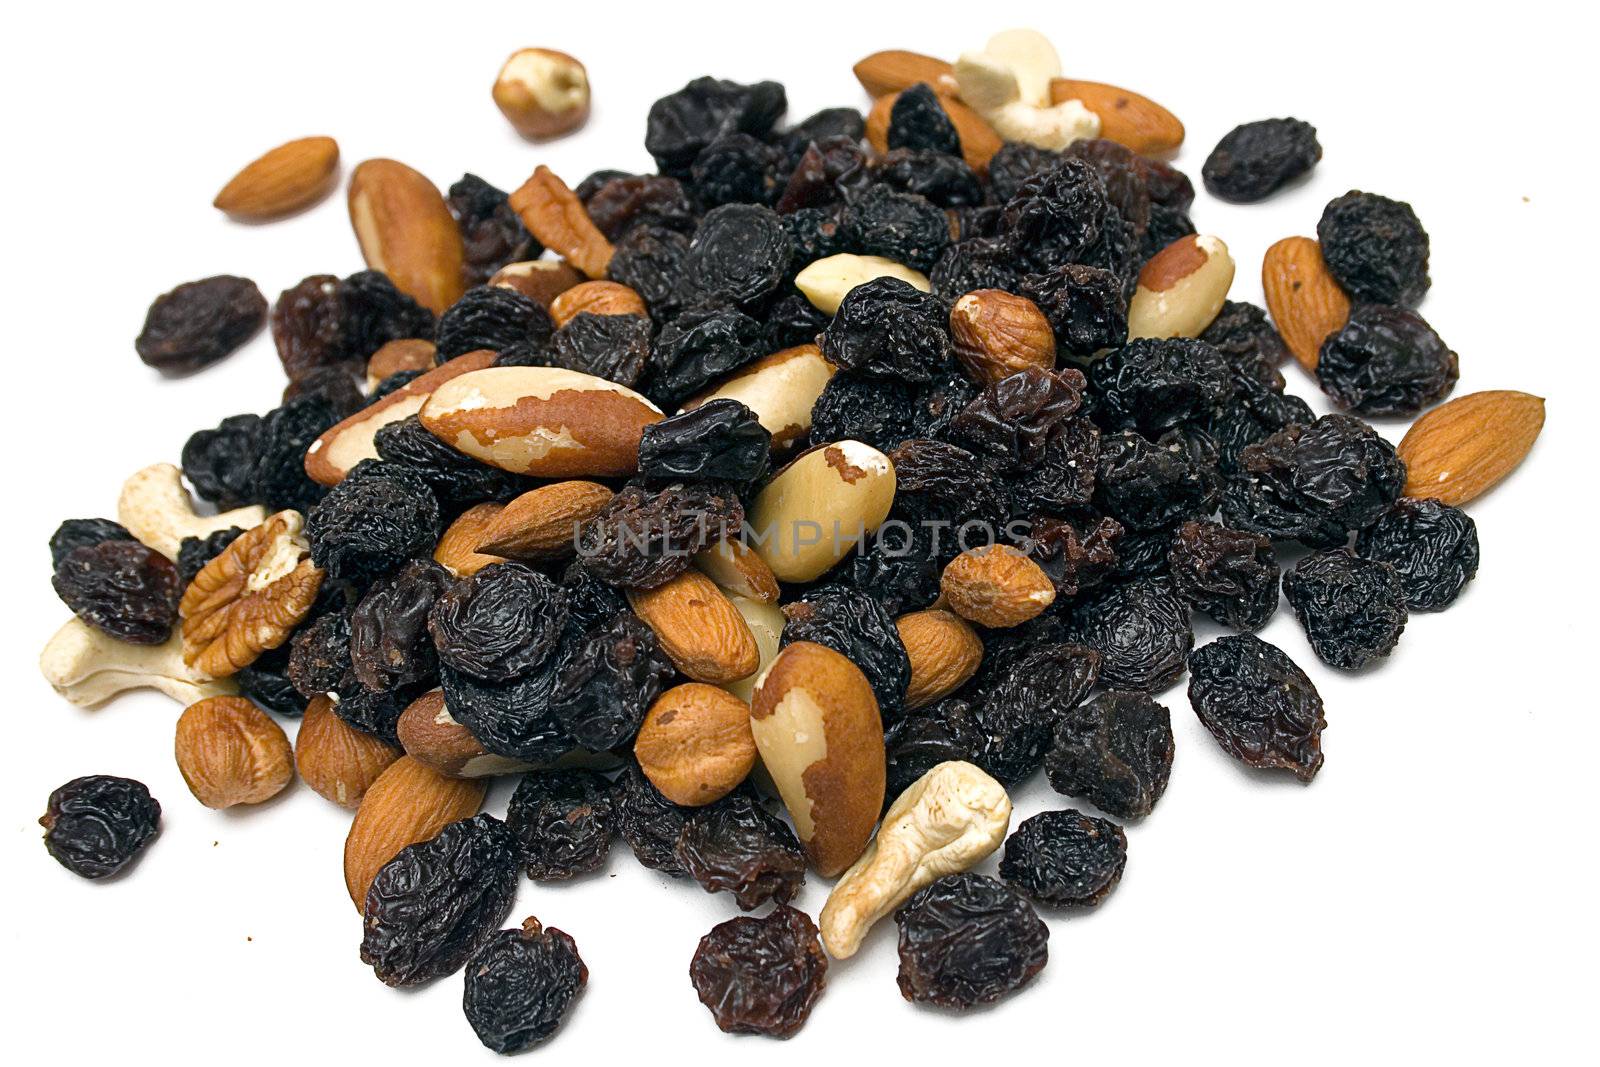 Pile of nuts and raisins isolated on a white background.